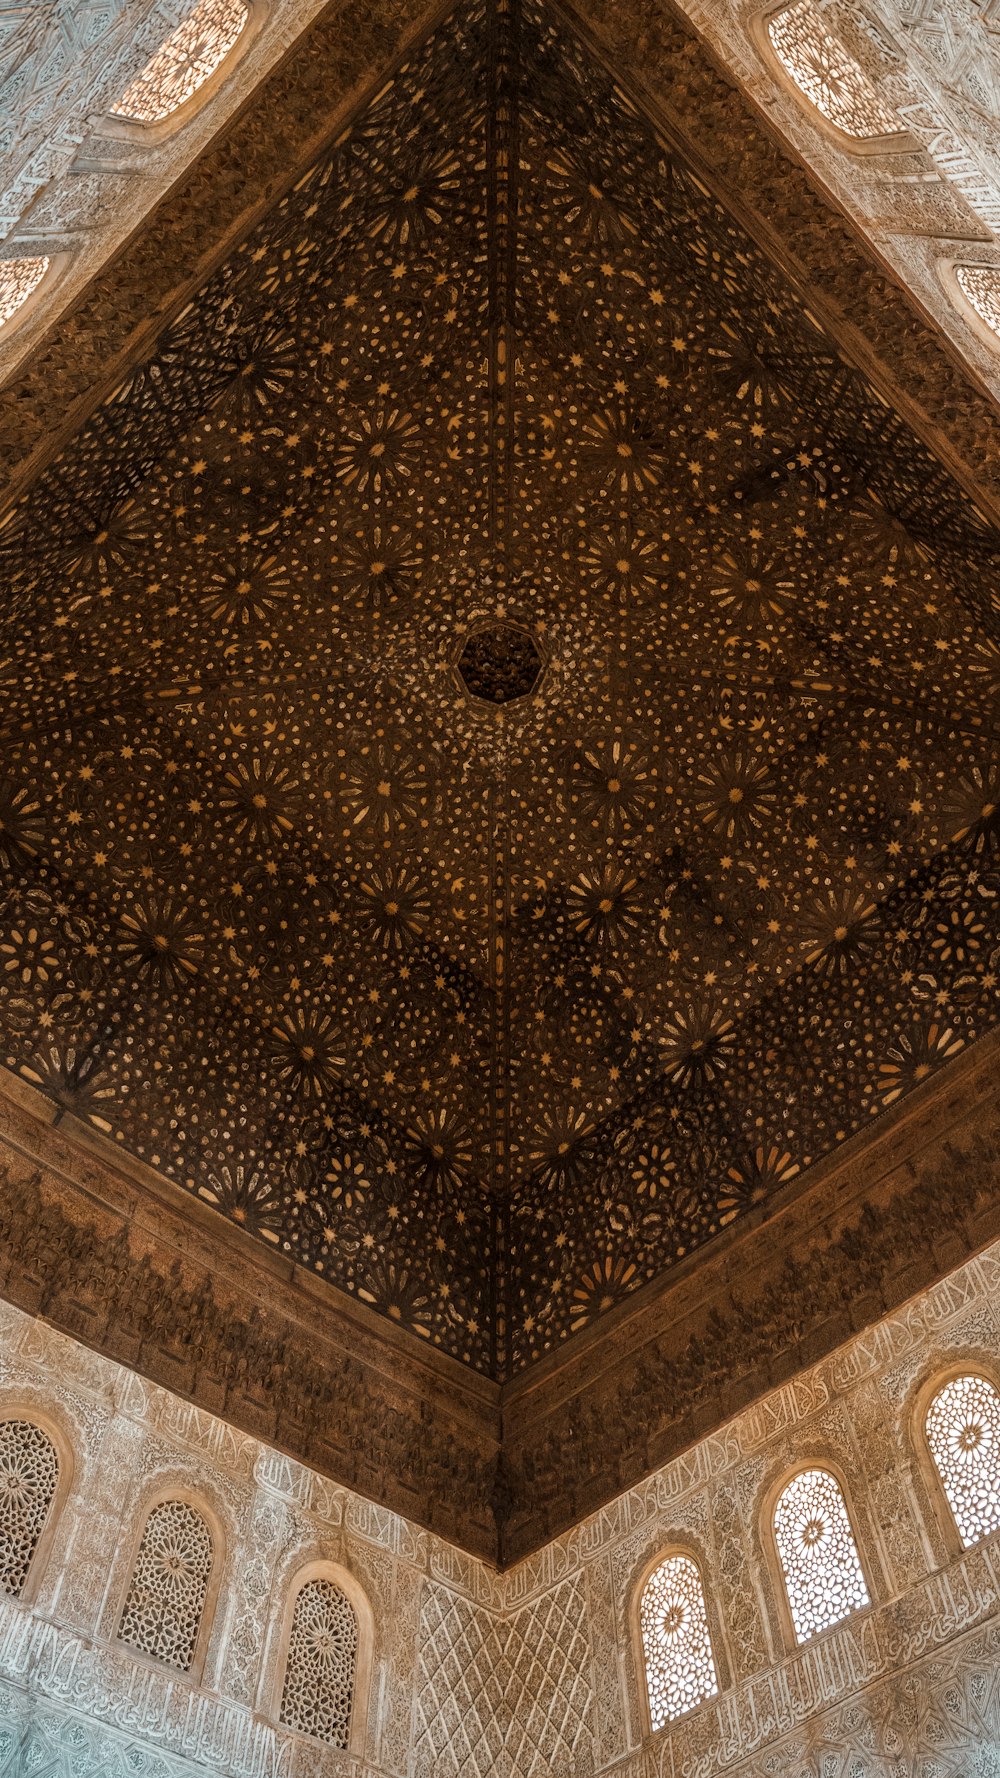 a ceiling with many arches